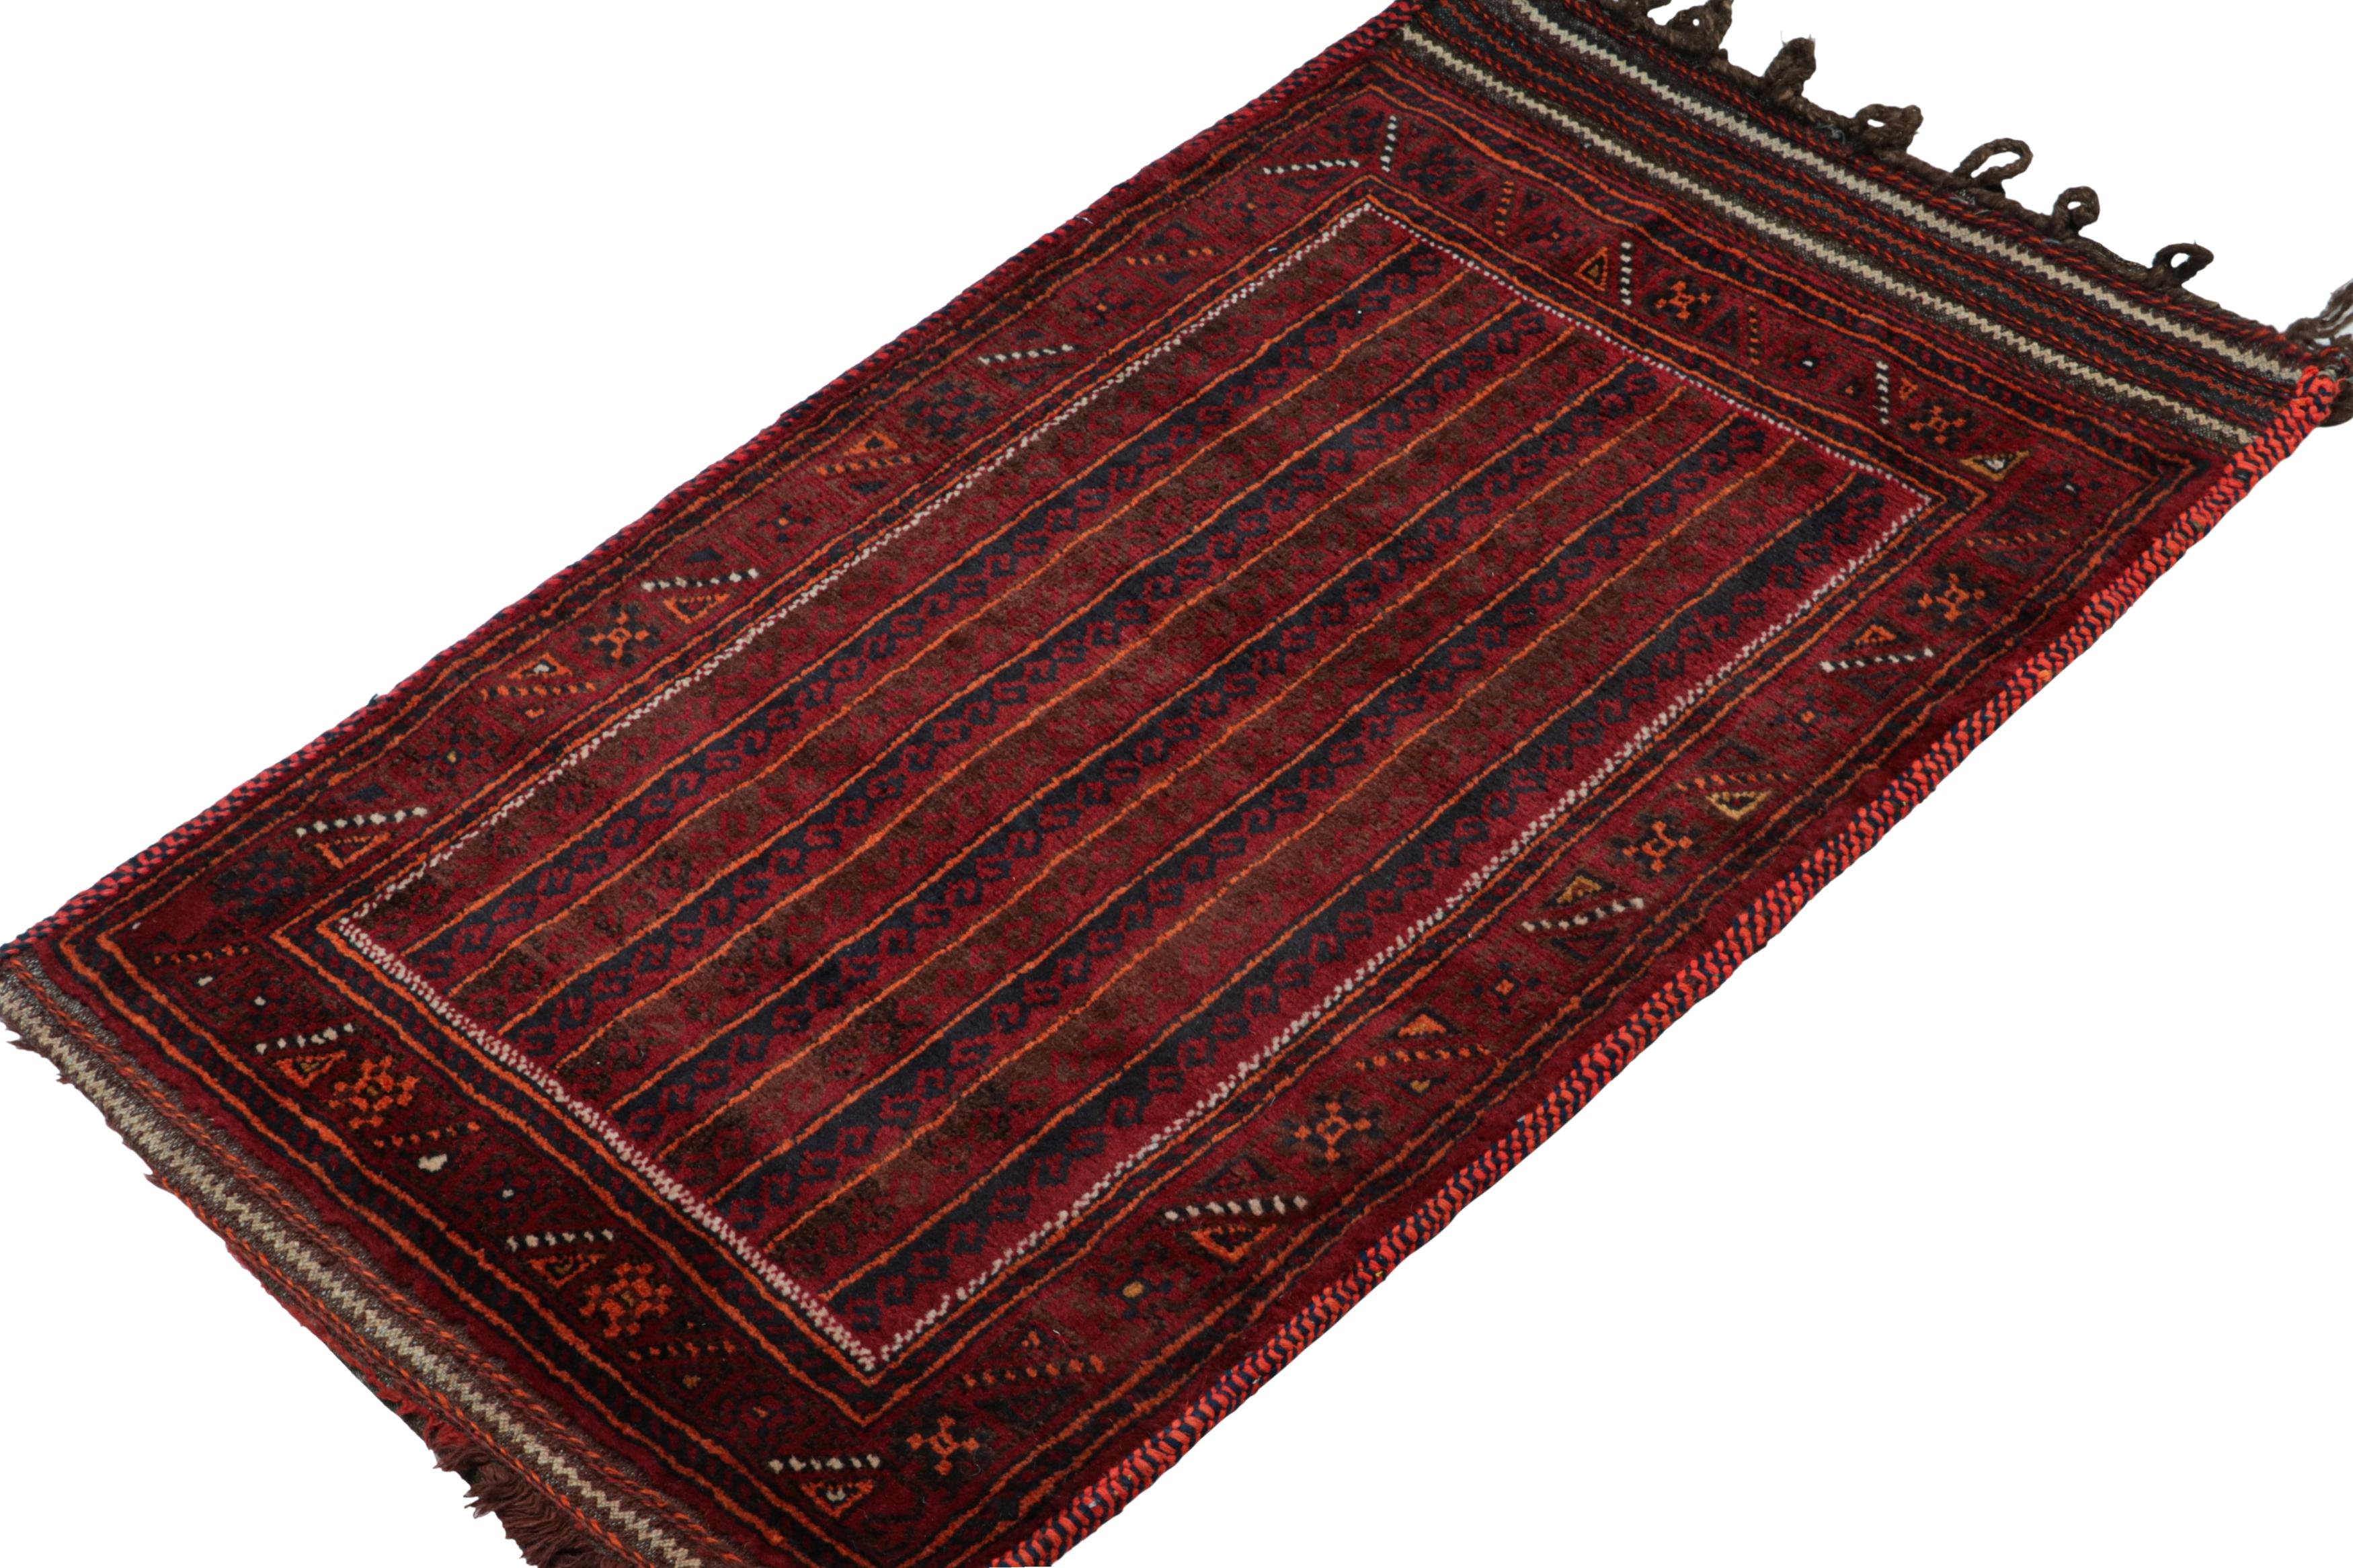 Hand-knotted in wool, this 2x4 Baluch Persian rug of the 1950s is the latest to enter Rug & Kilim’s Antique & Vintage collection.

On the Design:

The piece enjoys a defined movement with tribal patterns in tones of red, blue, black with subtle